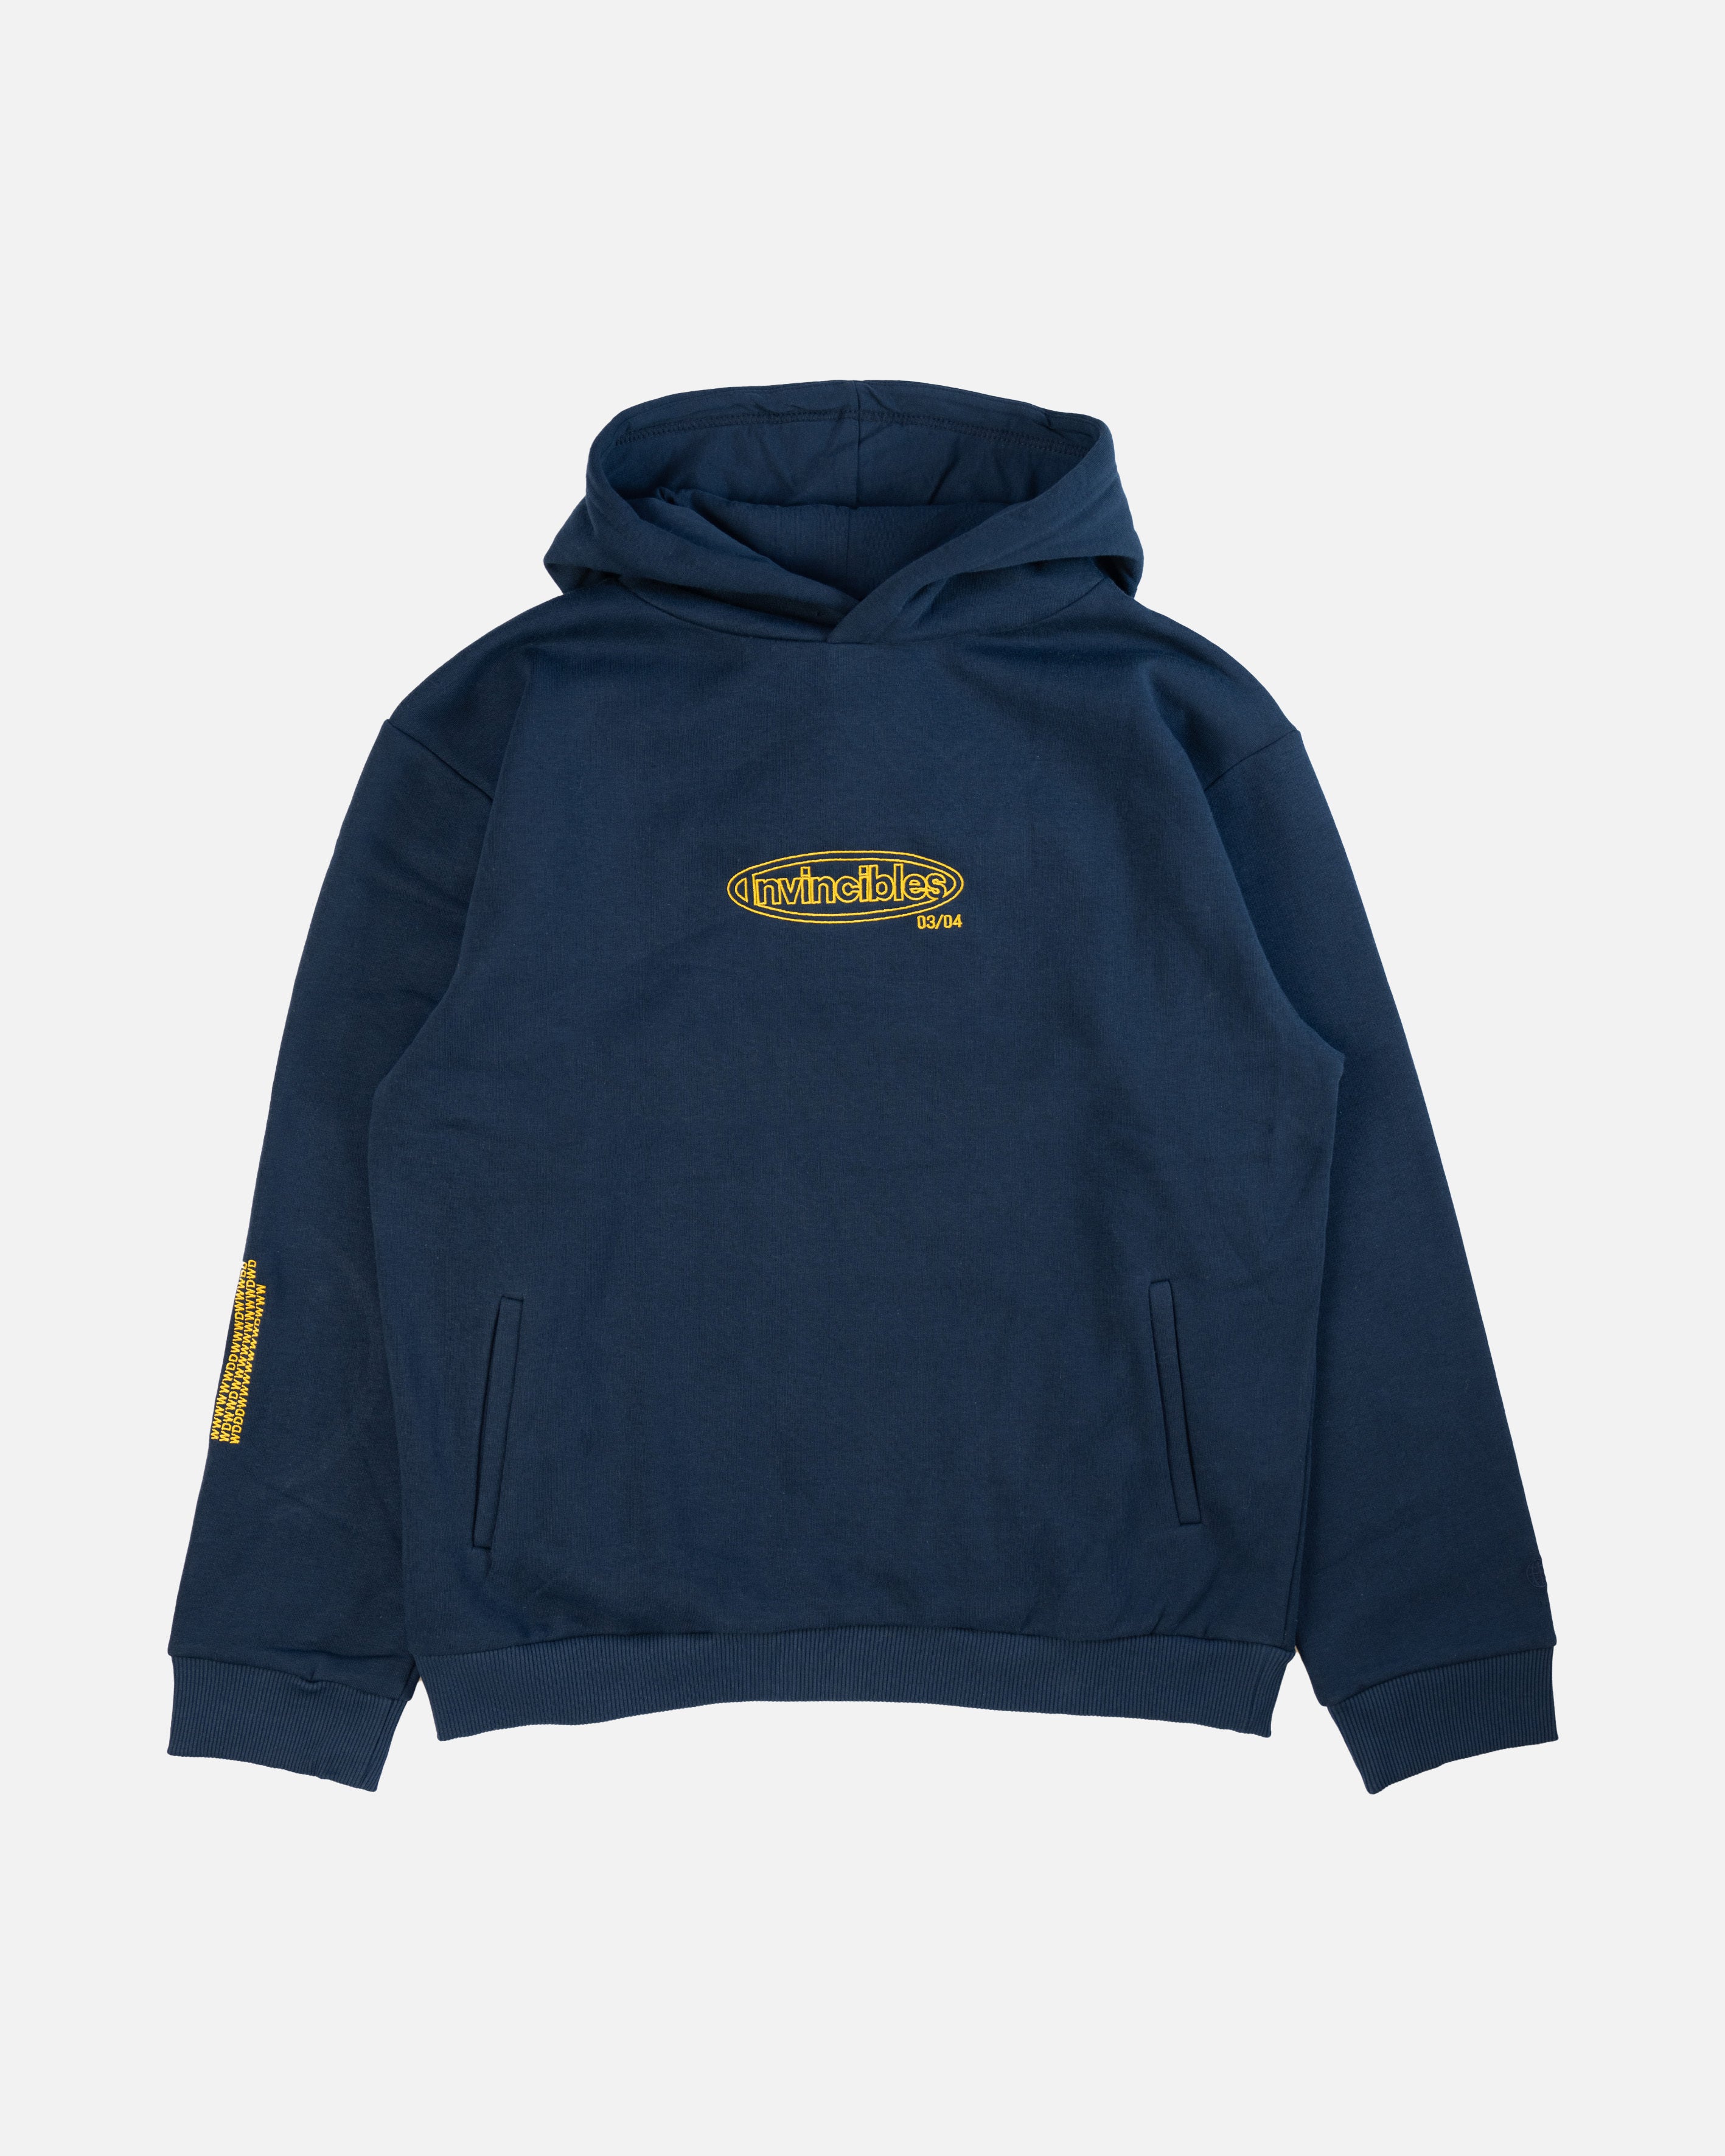 Invincibles Embroidery - Hoodie